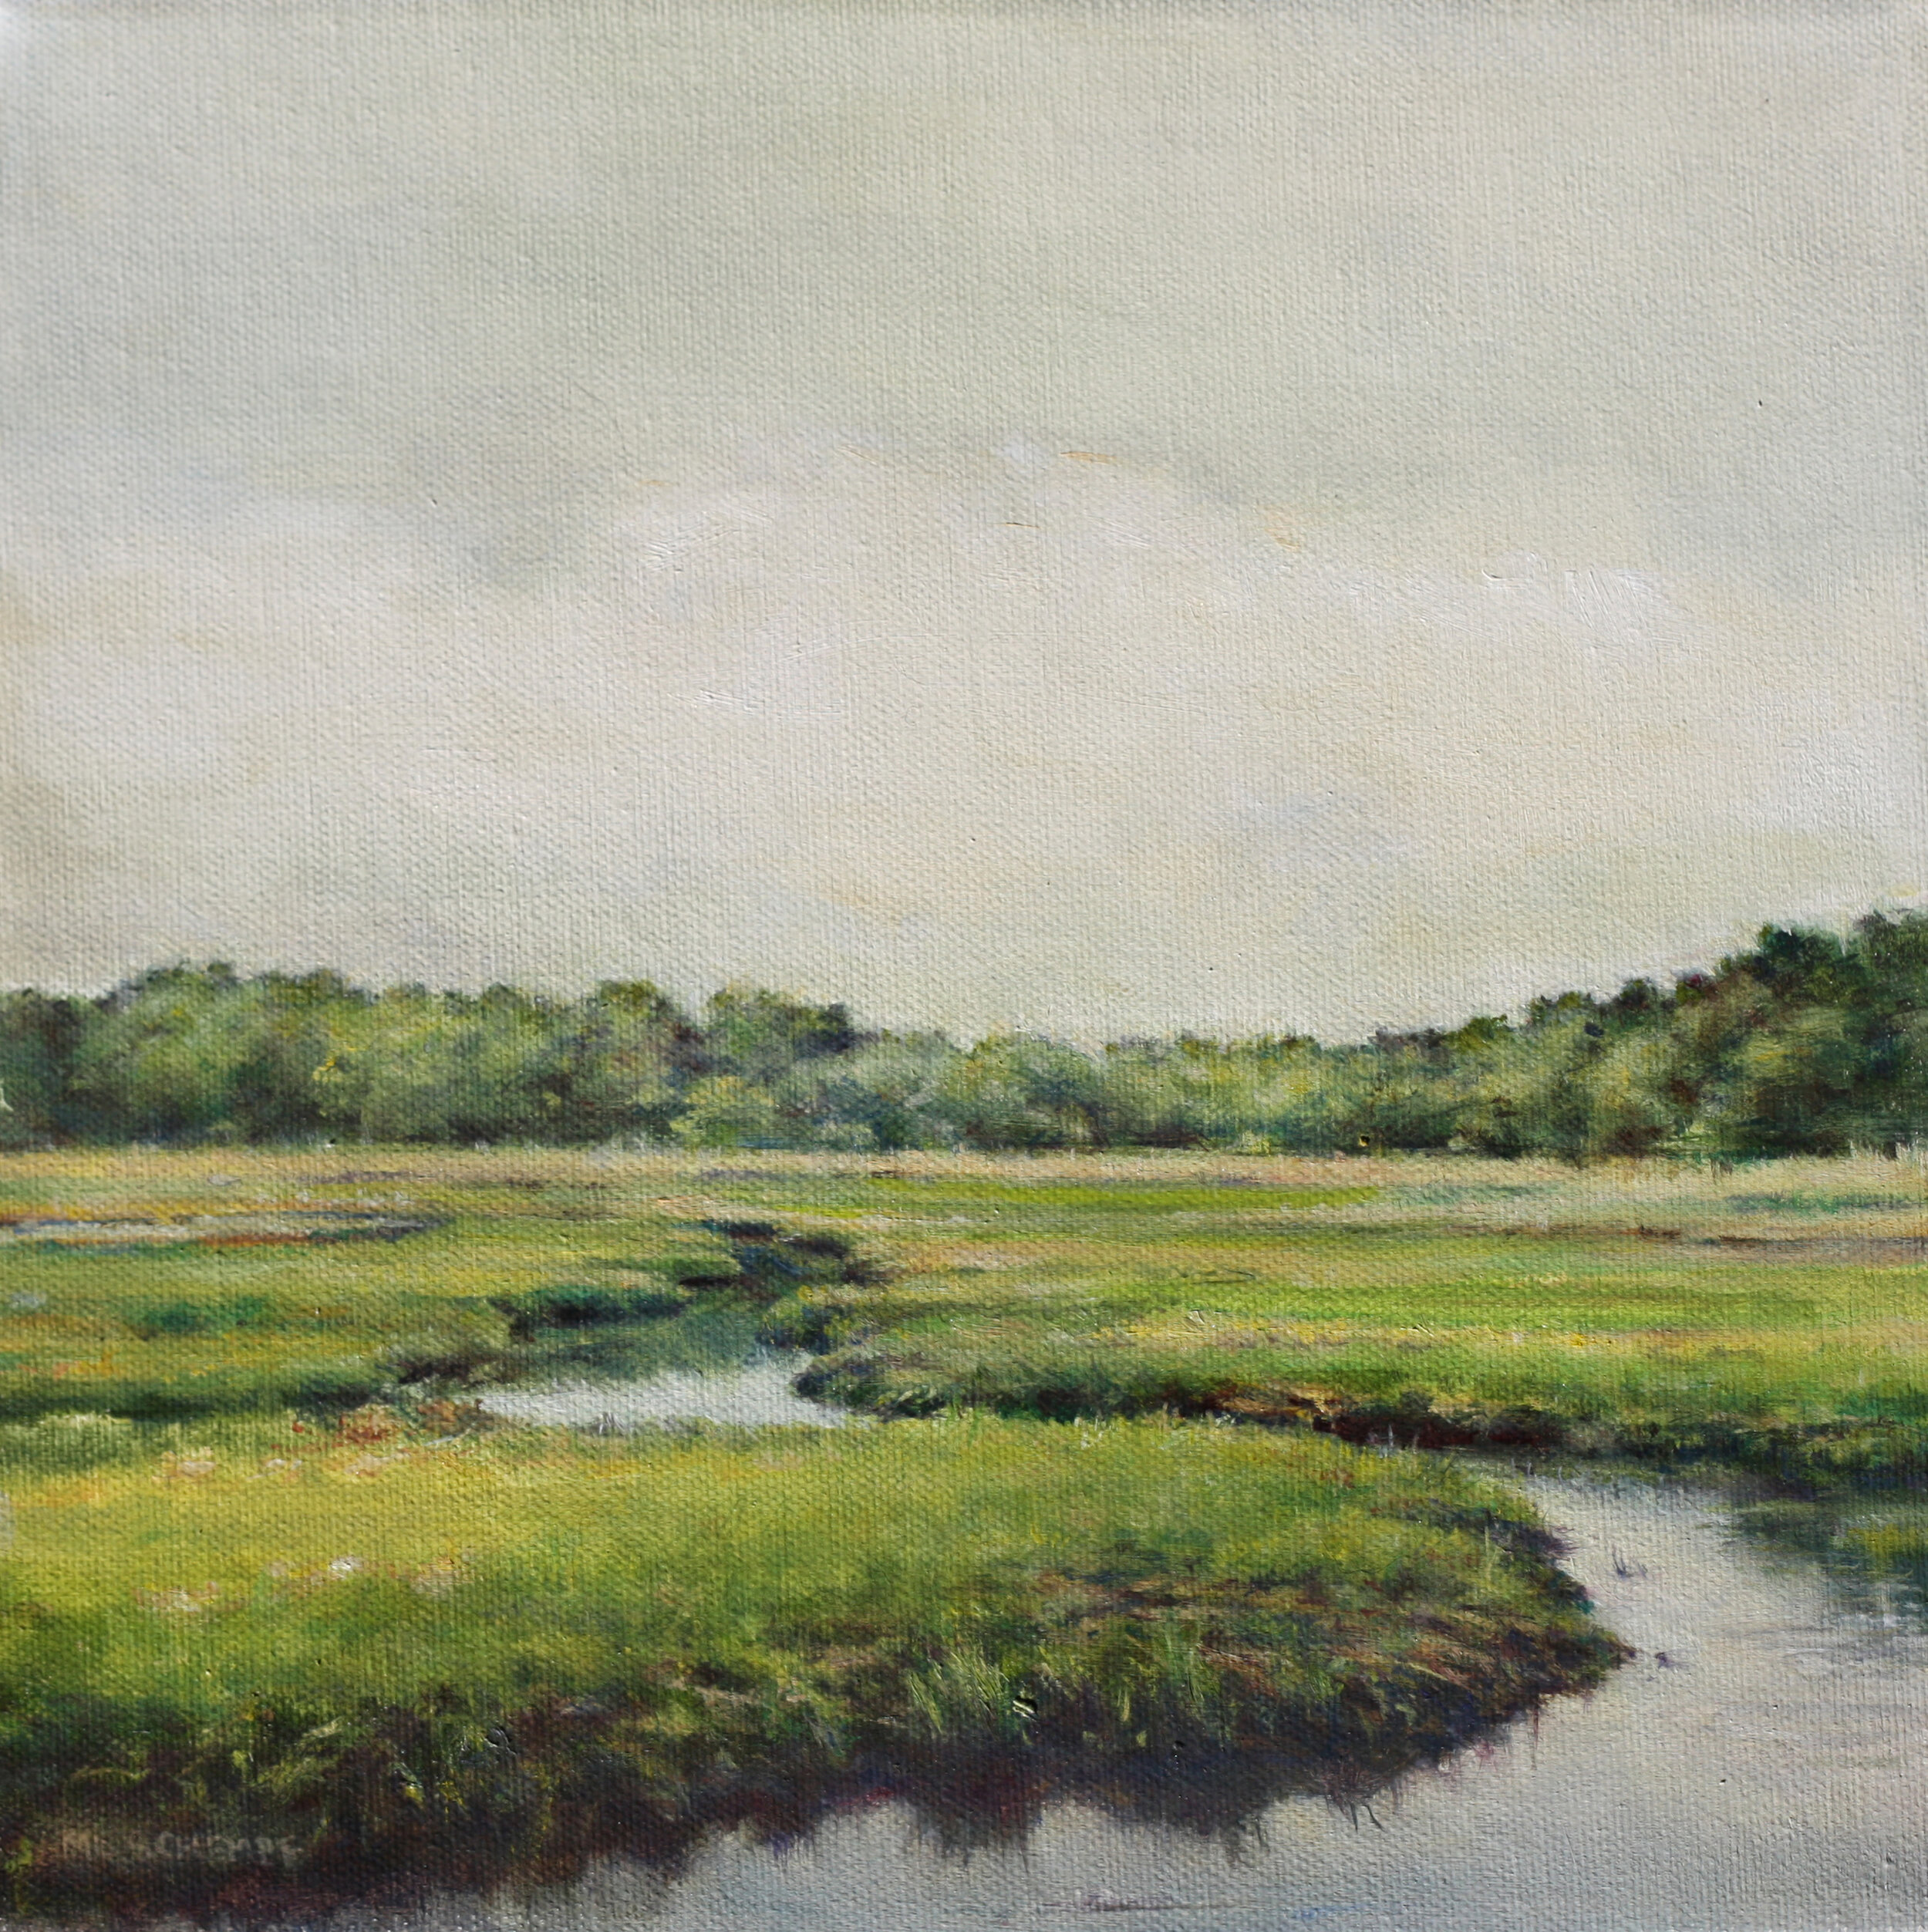  Mary Lou Schempf  Summer Marsh,  10” x 10”, oil on canvas   (private collection)  